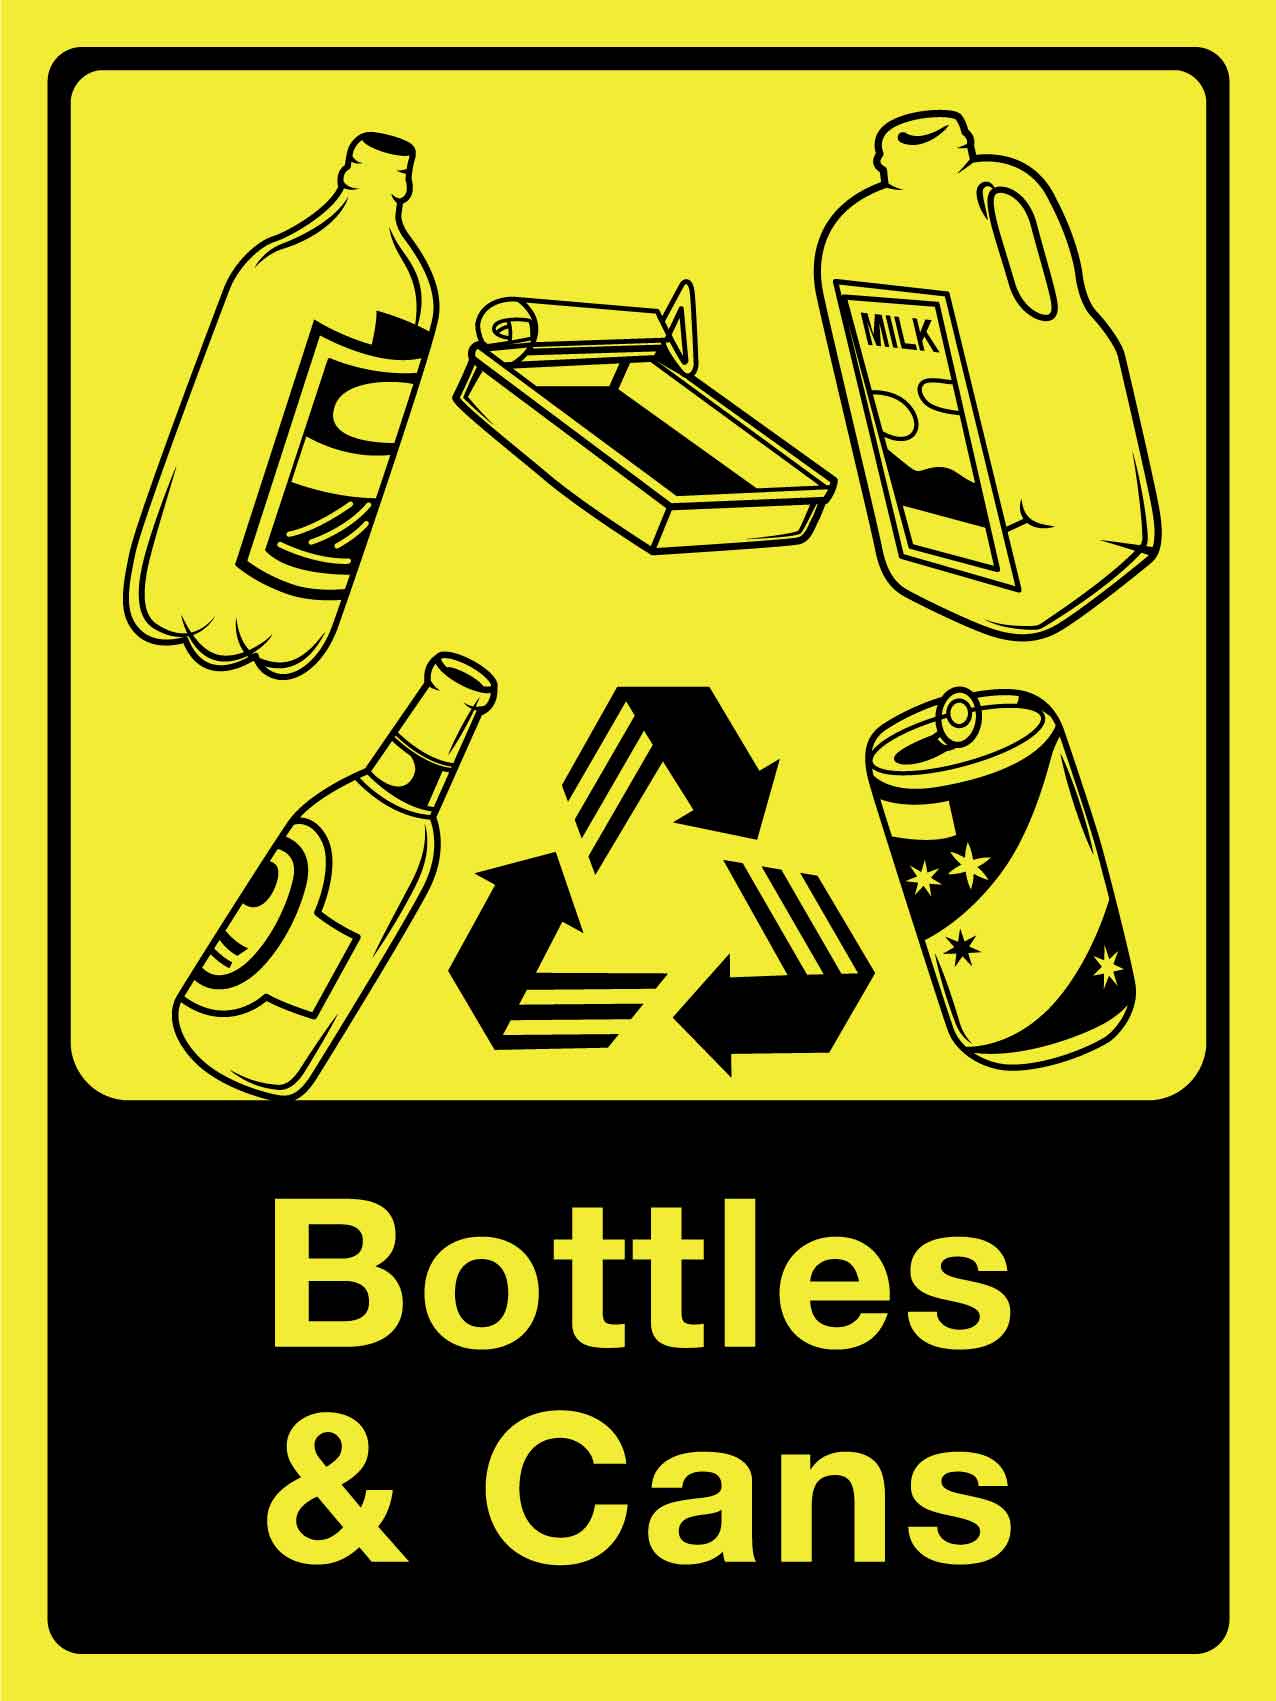 Recycle Bottles & Cans Sign